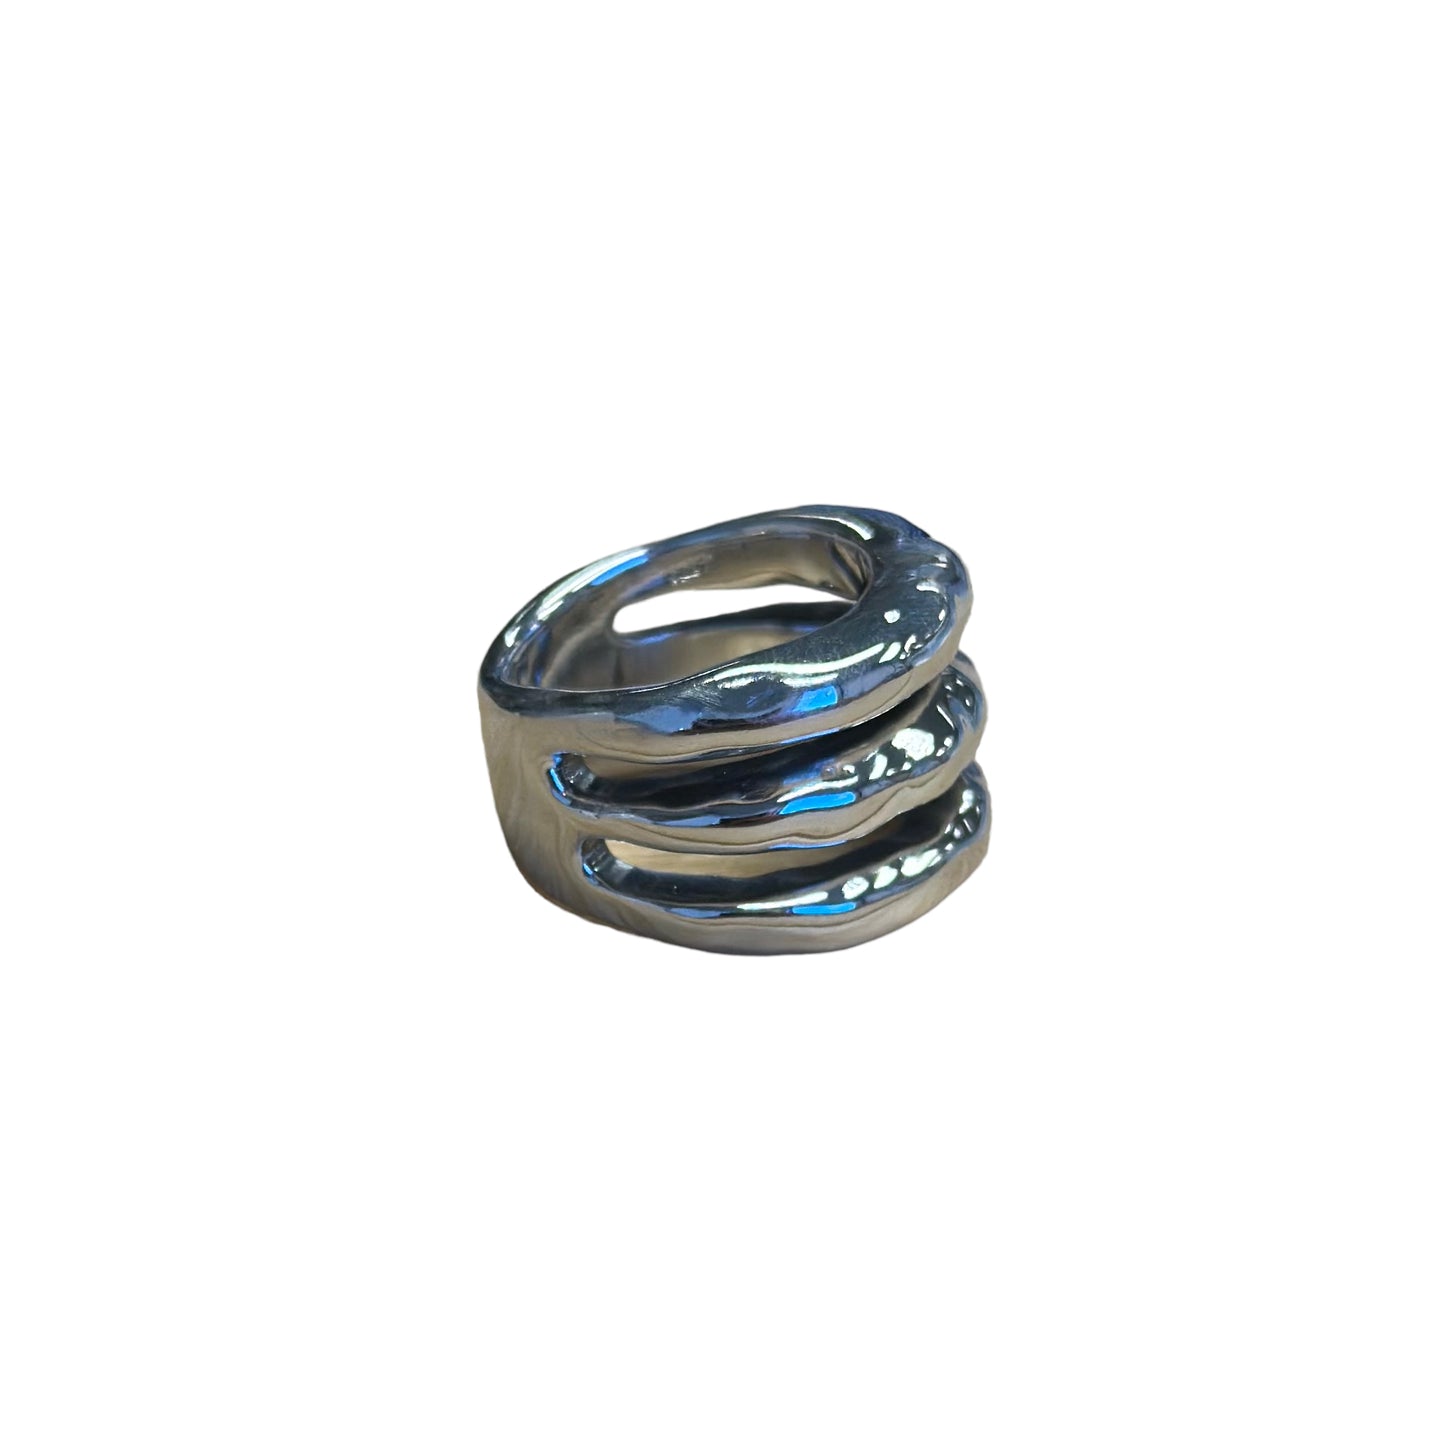 3 Bar 17mm Row Ring Sterling Silver